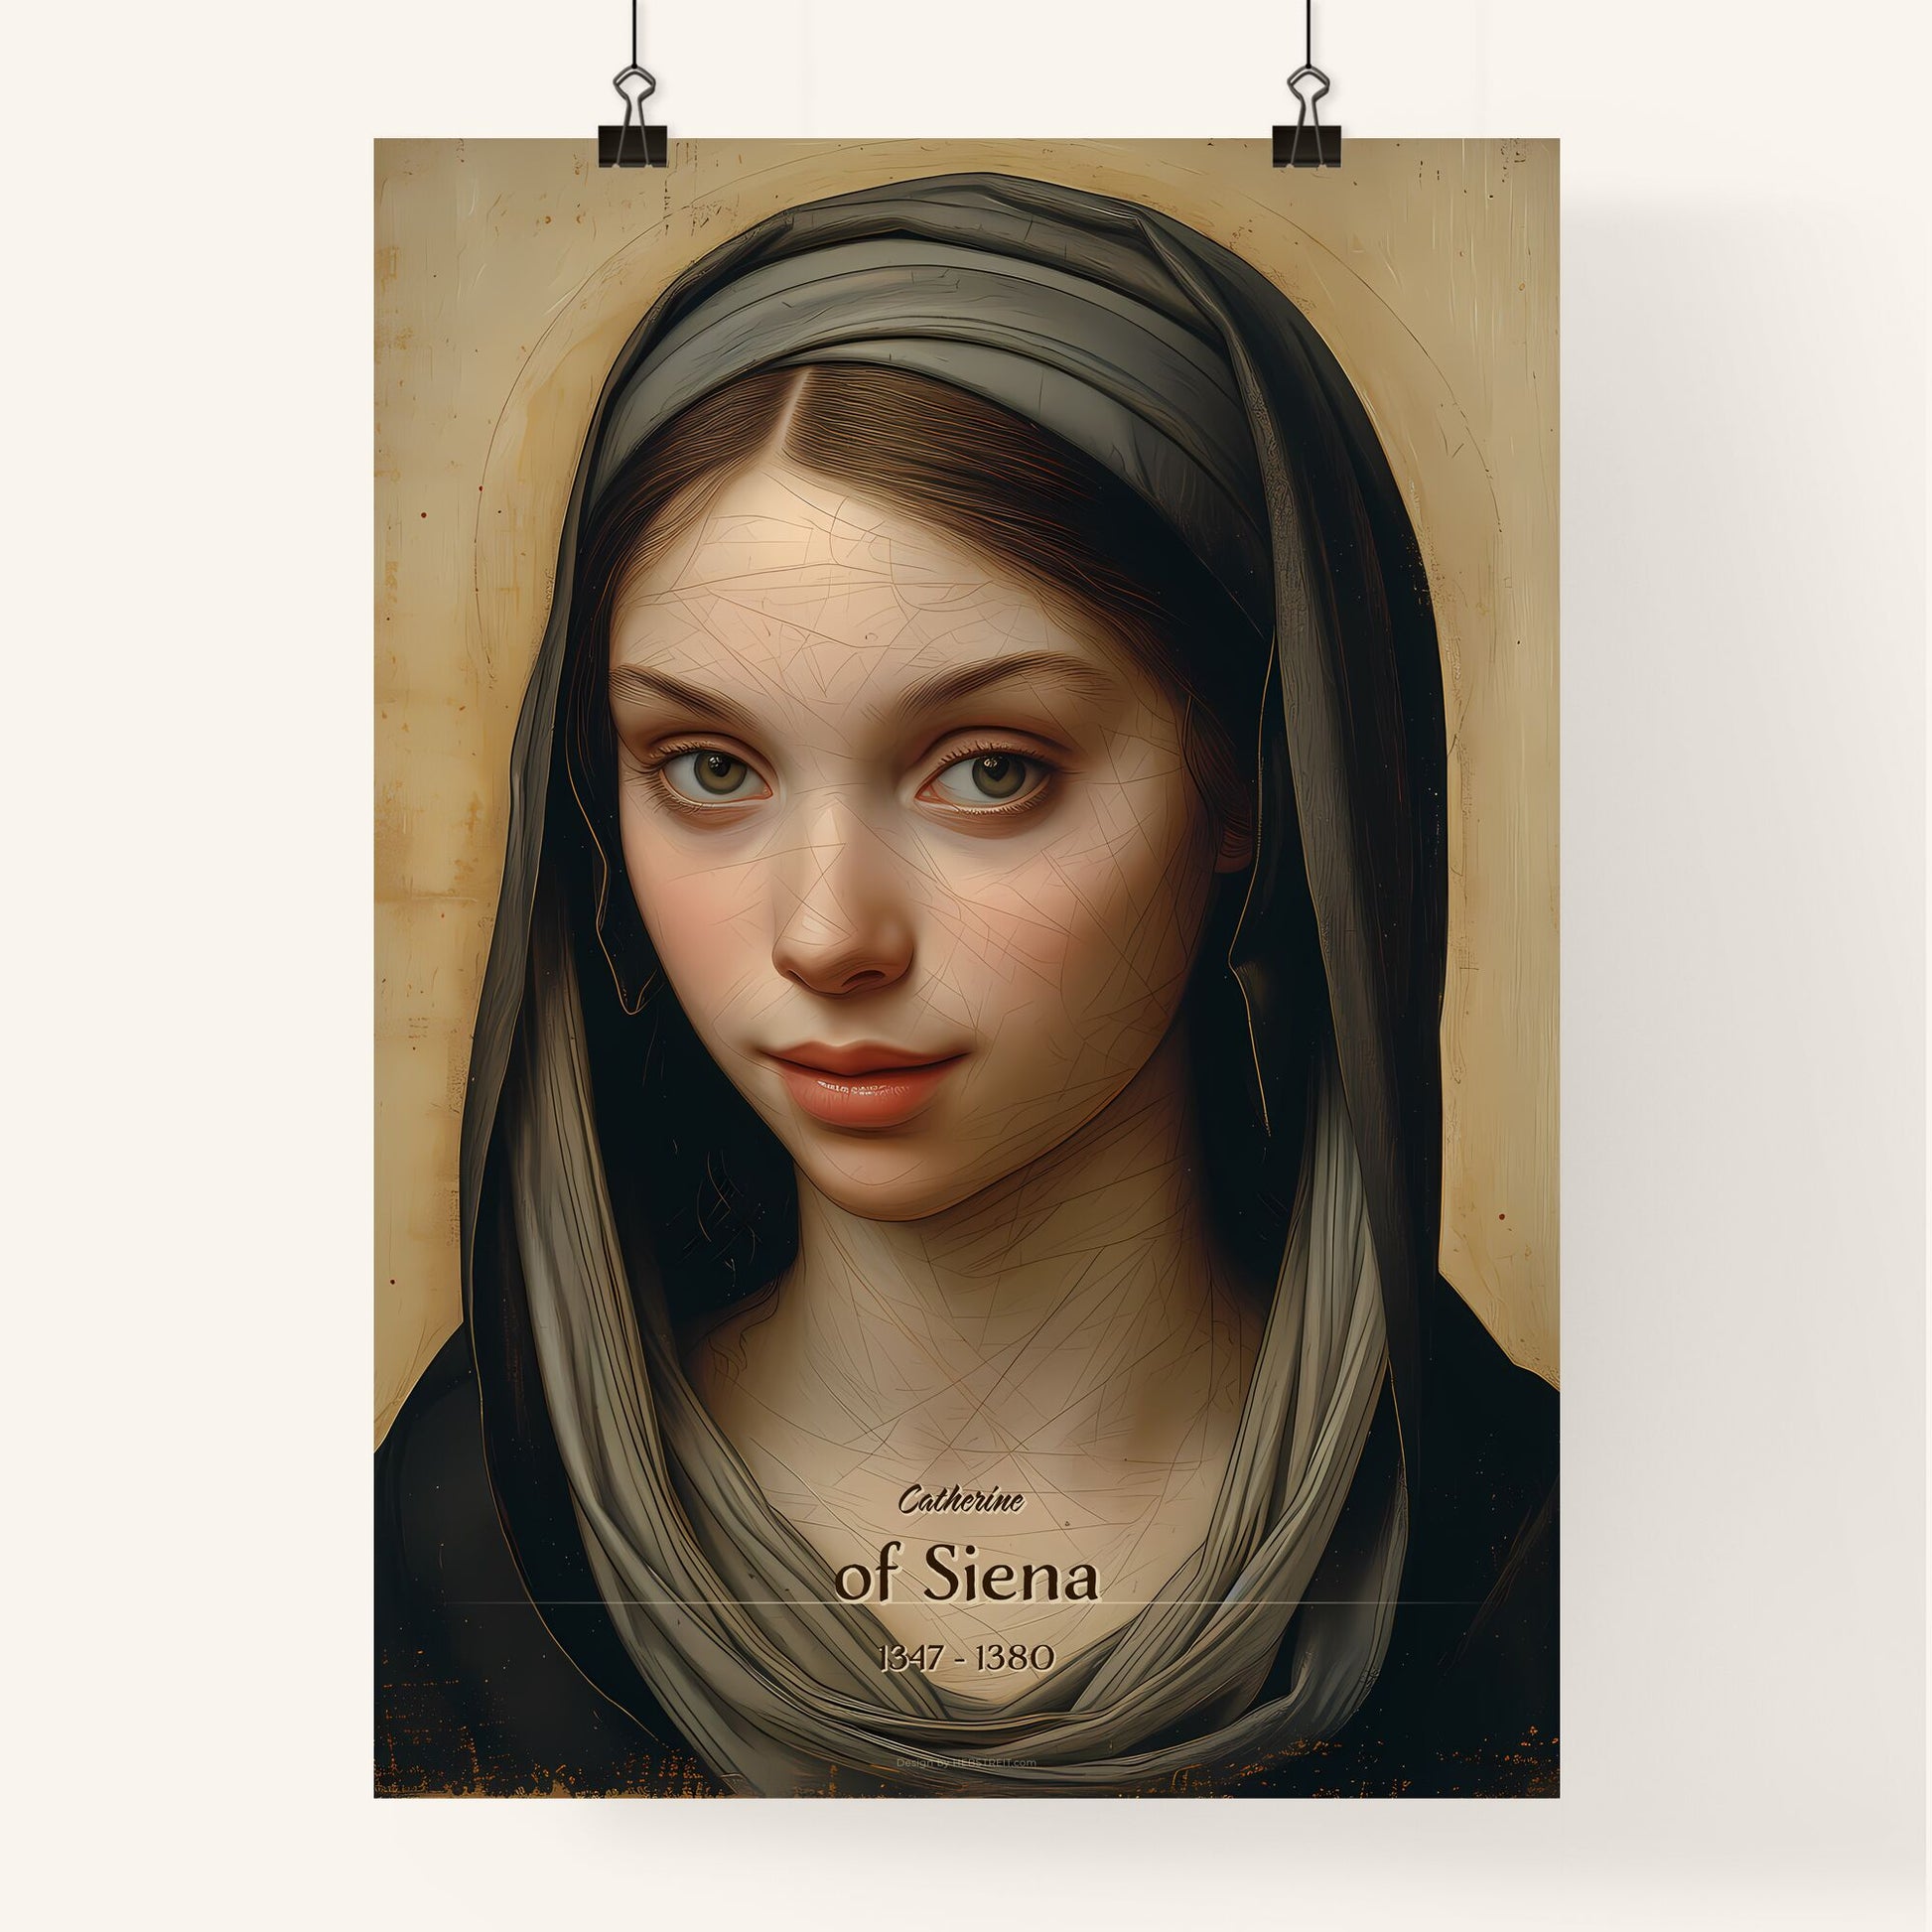 Catherine, of Siena, 1347 - 1380, A Poster of a woman with a scarf on her head Default Title